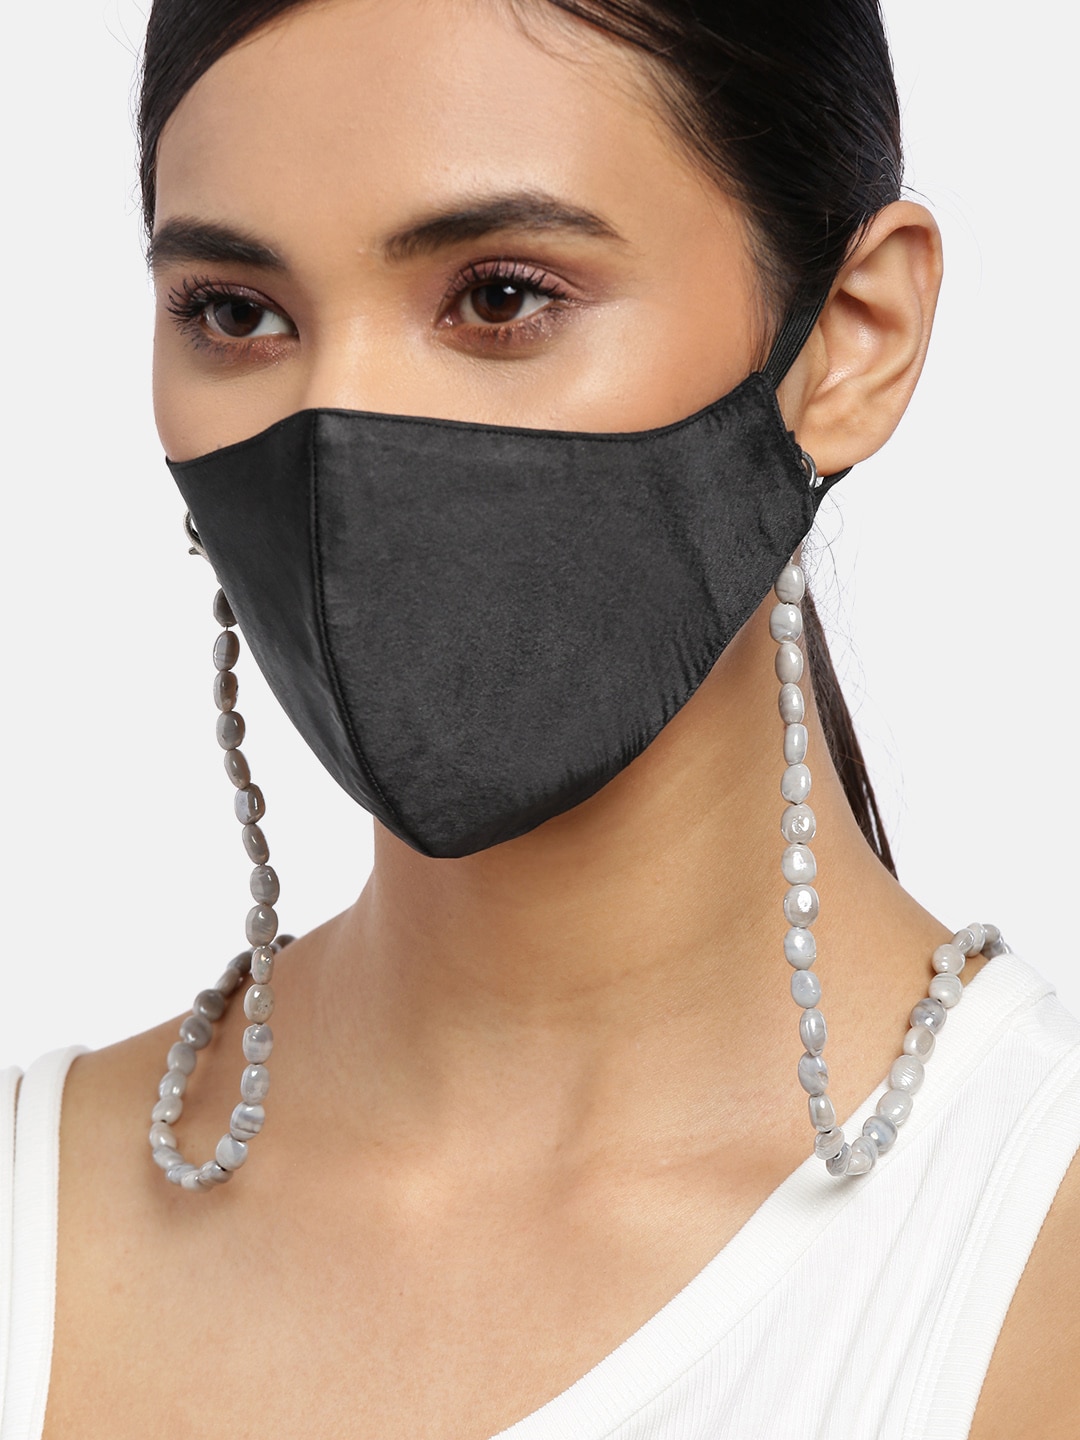 Blueberry Women Black Solid Satin Reusable 2-Ply Cloth Mask with Grey Beaded Chain Price in India